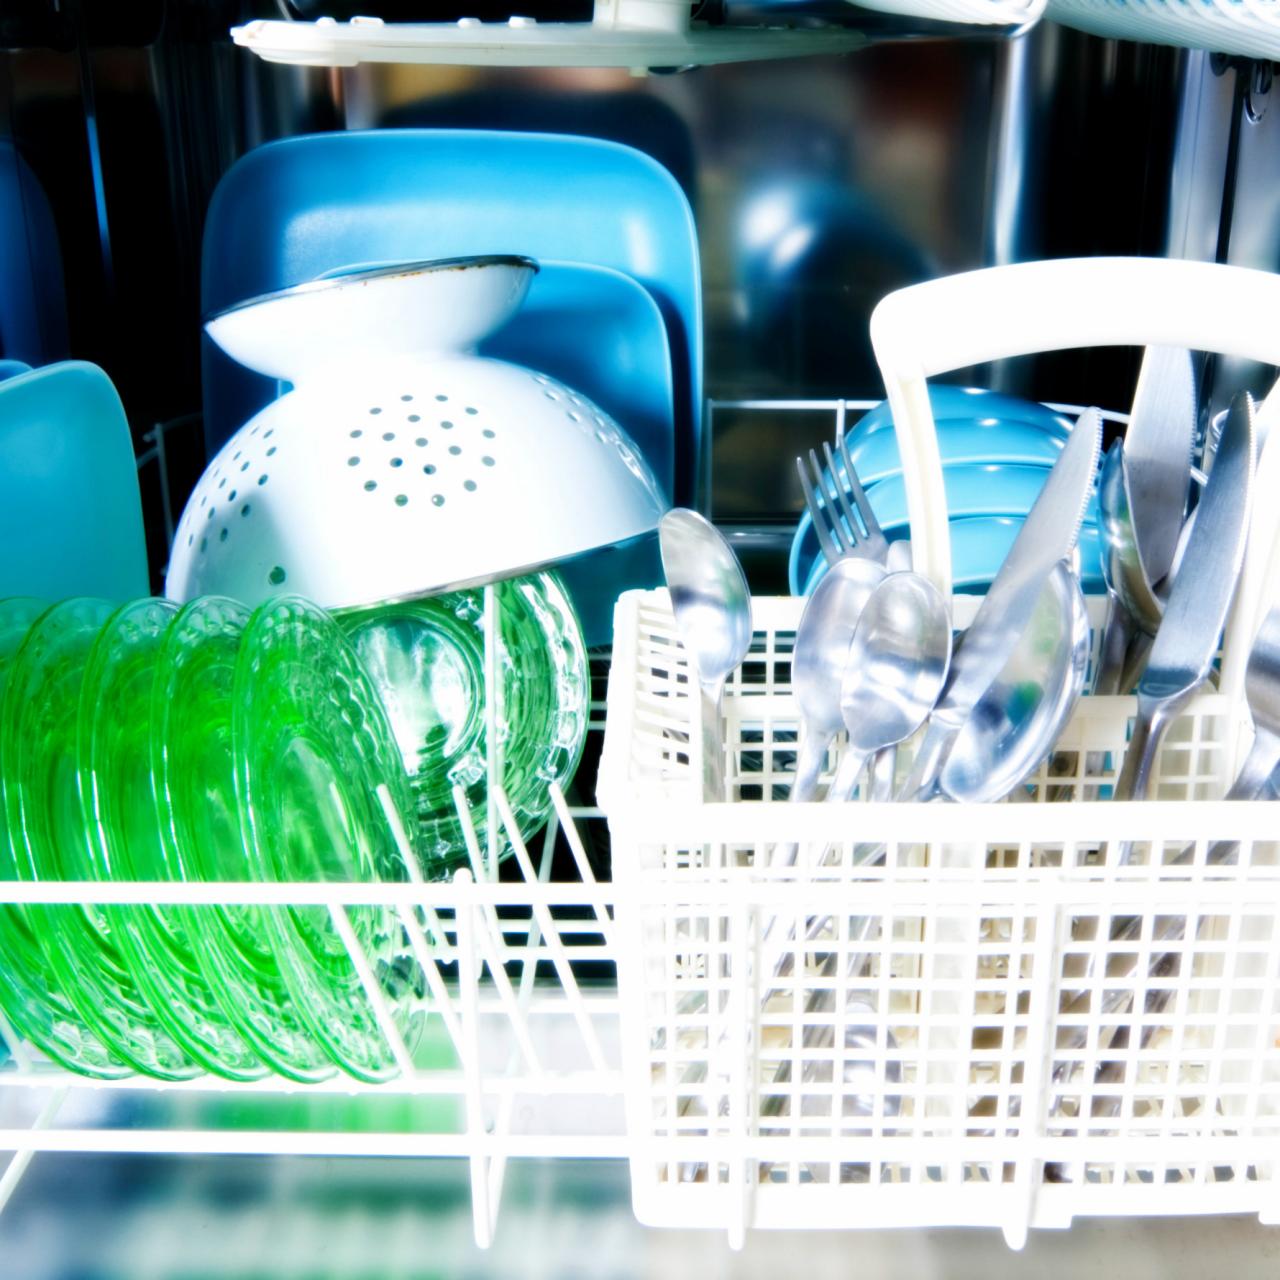 Why you shouldn't put dish soap in your dishwasher